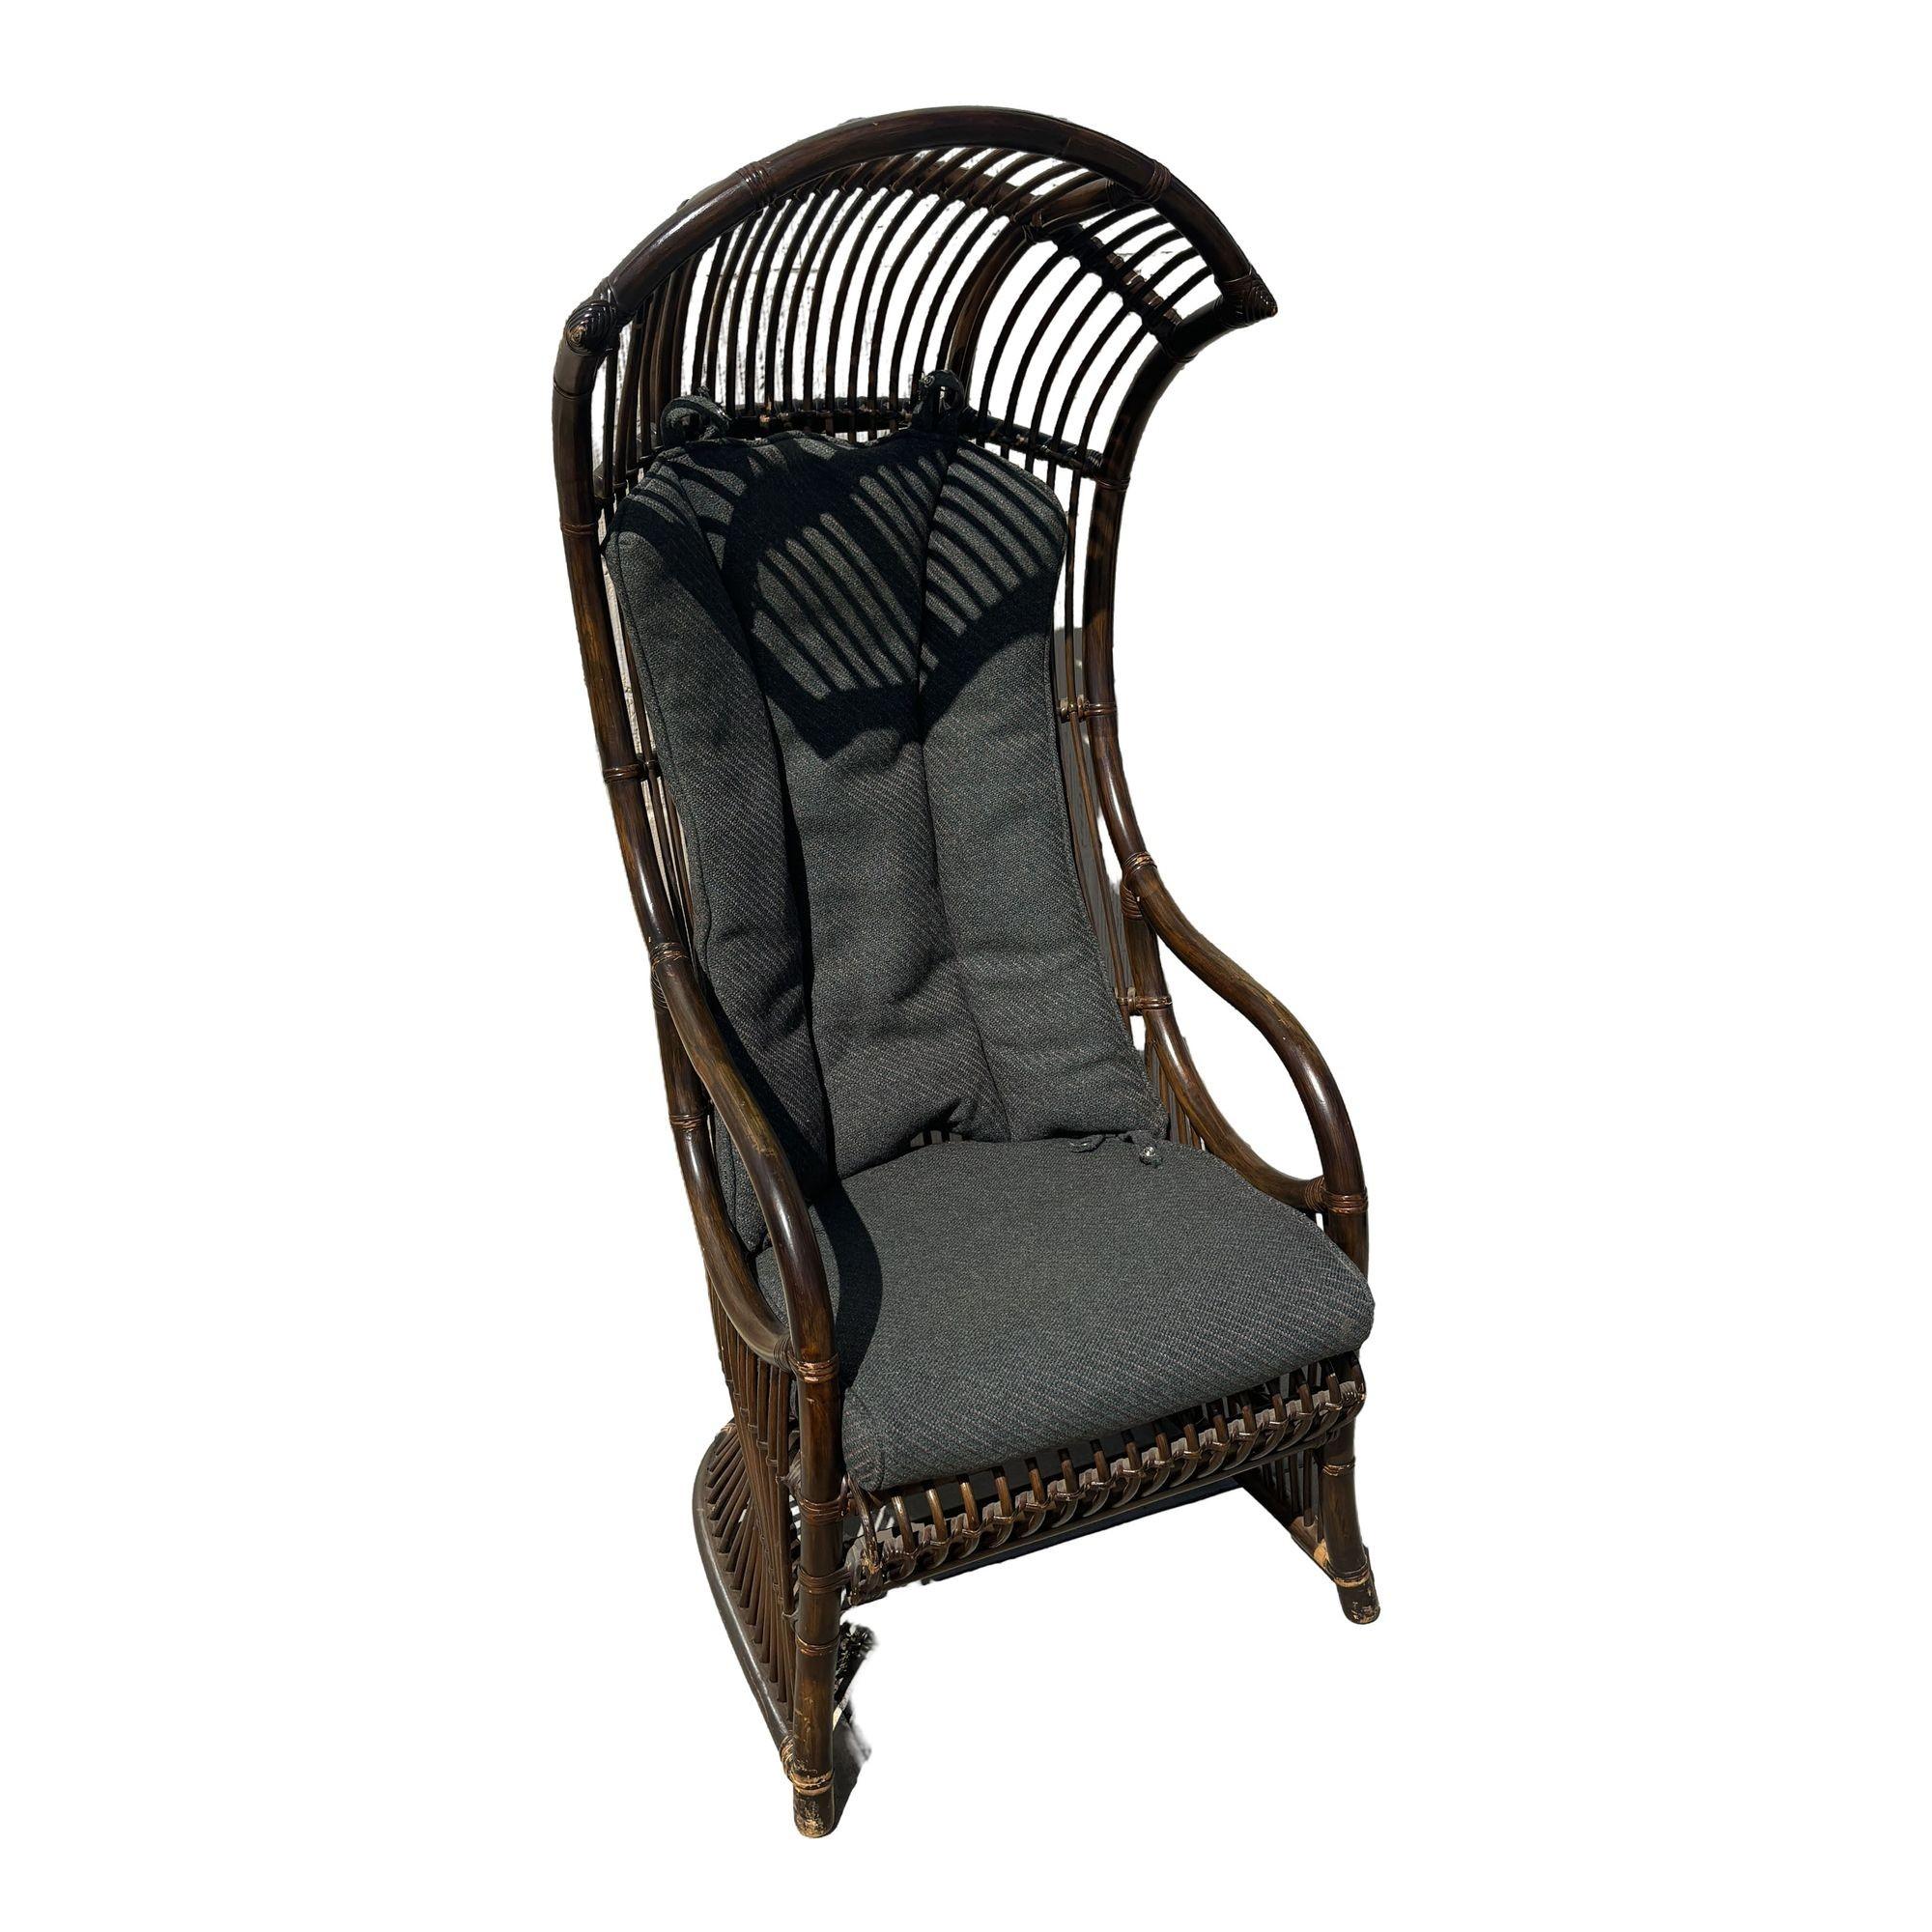 Revitalize your space with our pair of restored rattan throne chairs in a rich dark espresso brown stain with canopy tops . This exquisite duo adds a touch of high style Mid-century sophistication and comfort to any room, combining timeless design